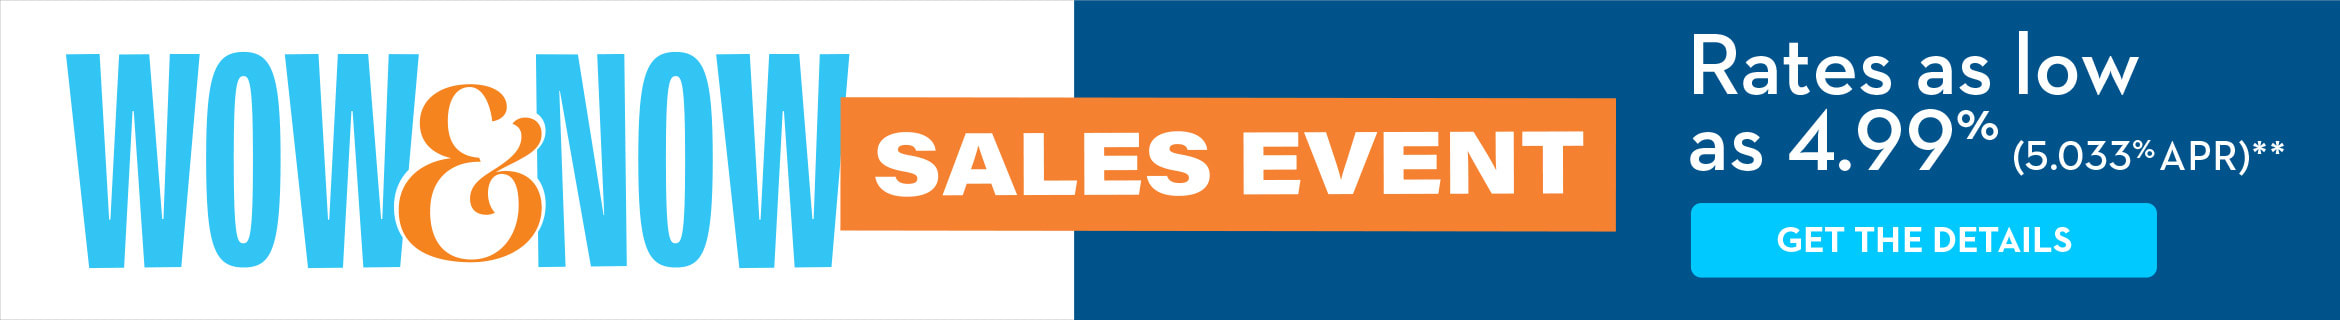 WOW & NOW SALES EVENT Rates as low as 4.99% (5.033% APR)** GET THE DETAILS